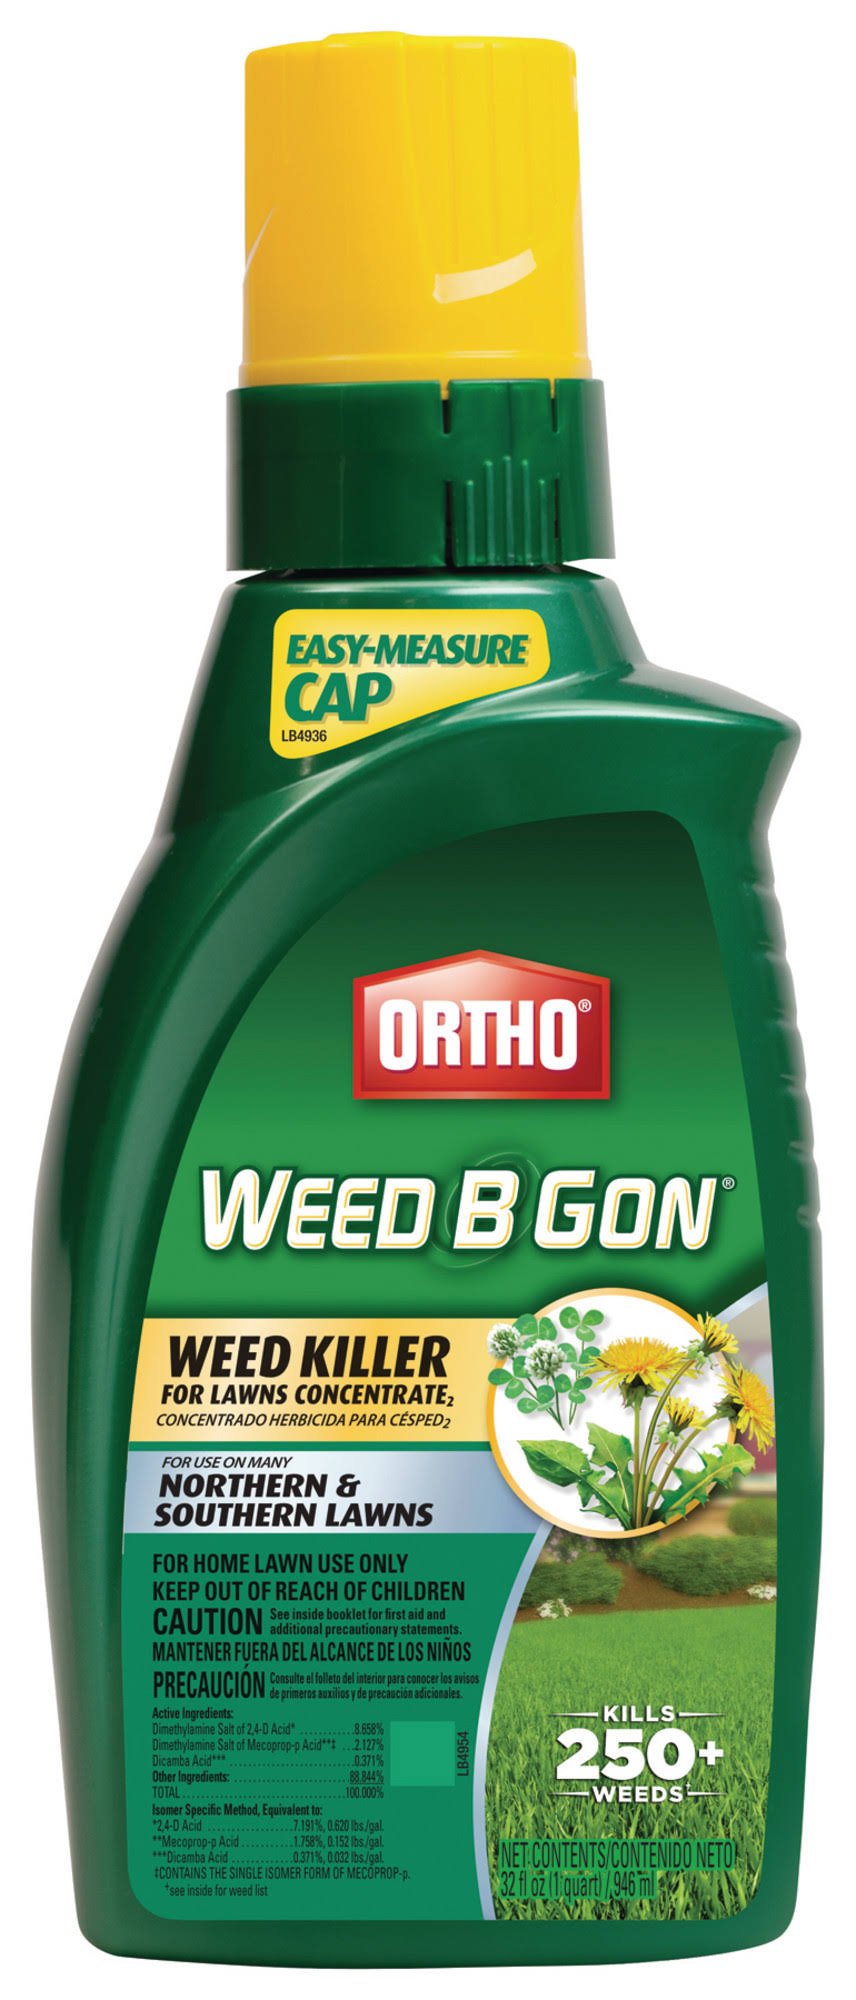 Ortho Weed B Gon Weed Killer Concentrate - 32oz